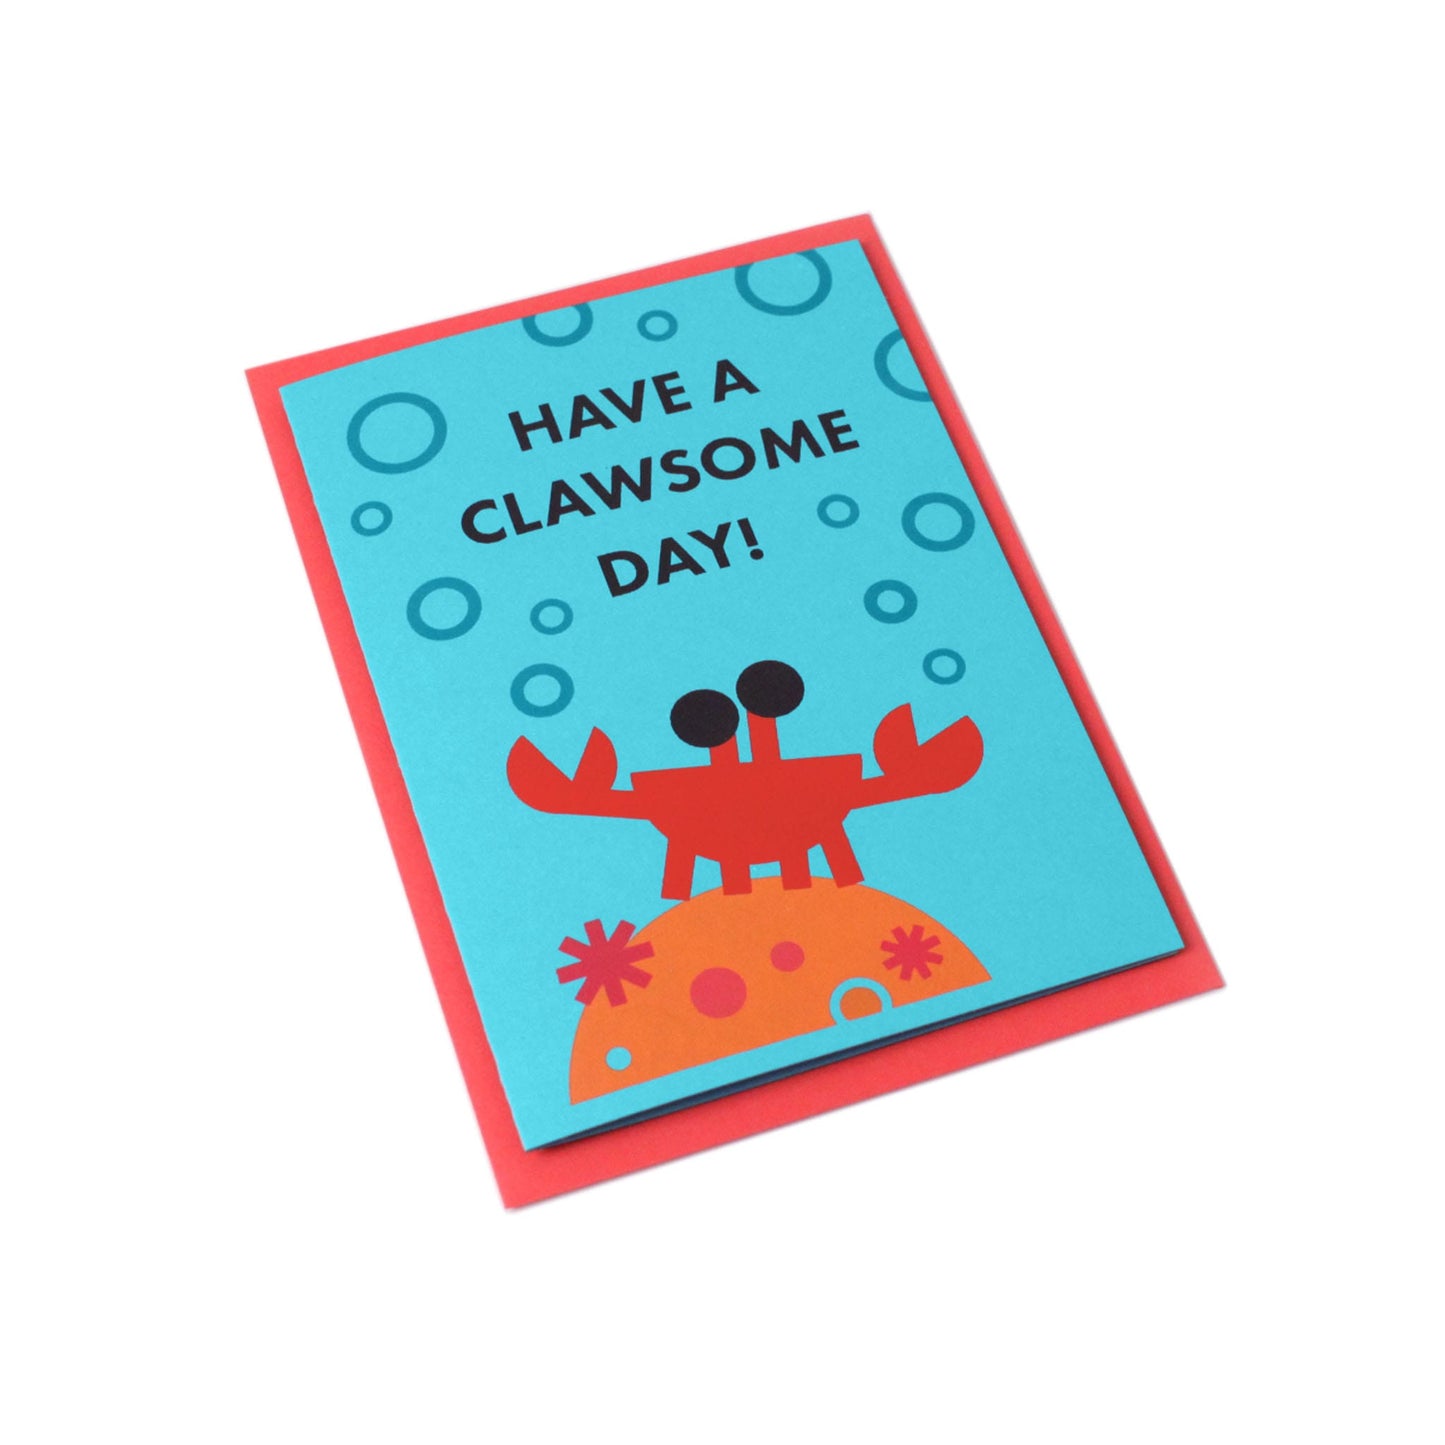 A tilted blue greeting card with the text that reads "Have a clawsome day!" and an illustration of a crab, coral, and bubbles. There is a red-pink envelope in the background.